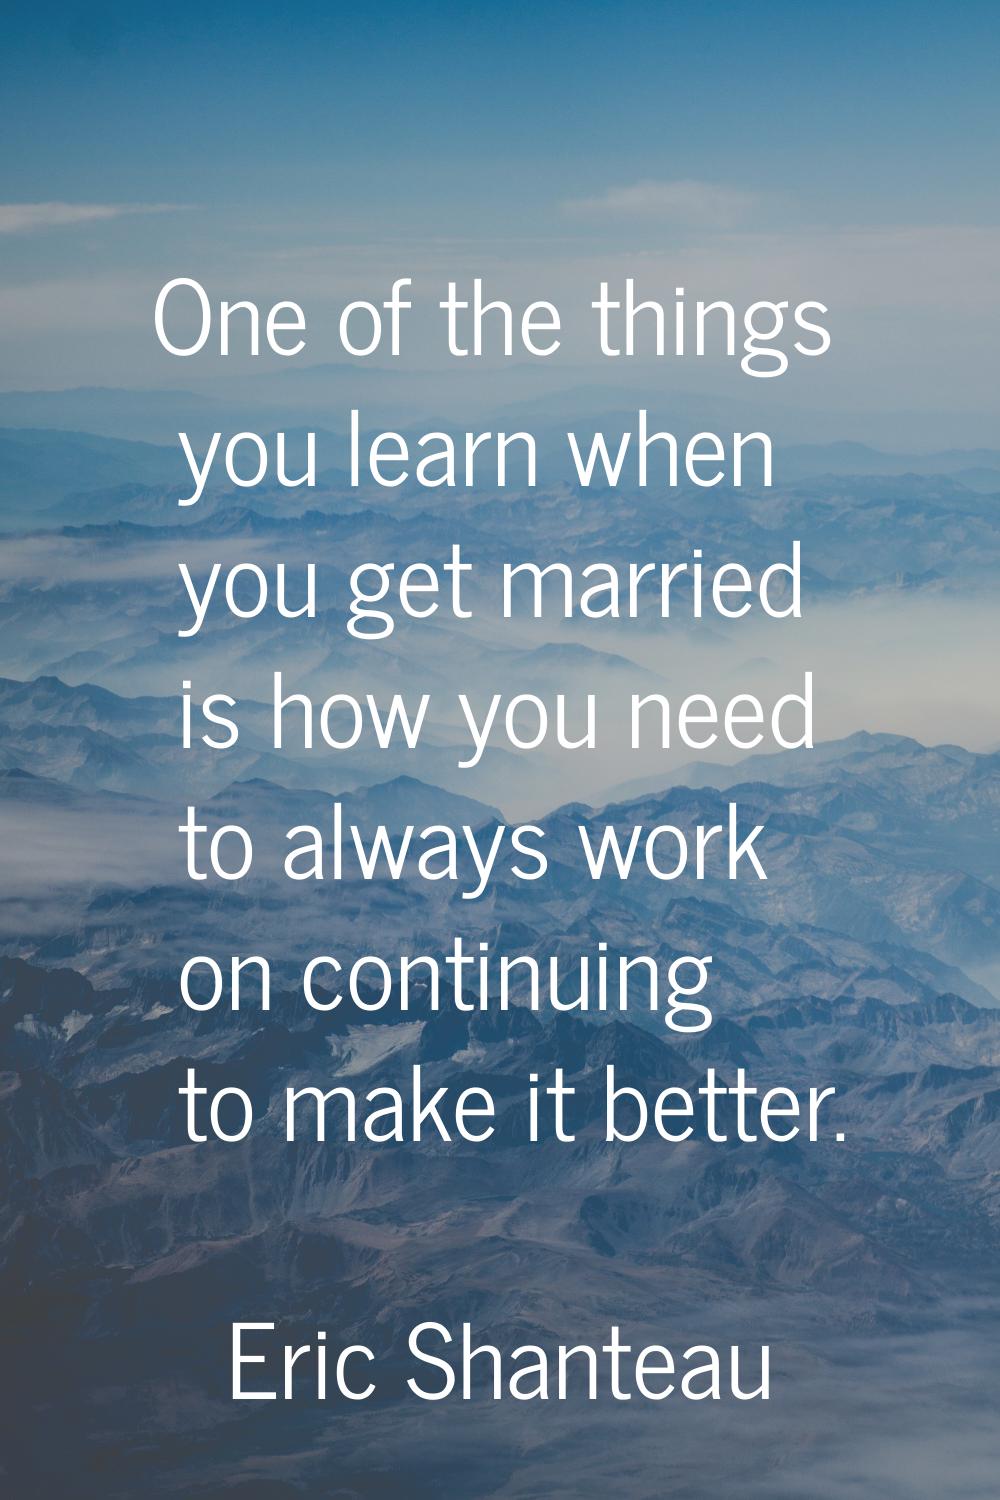 One of the things you learn when you get married is how you need to always work on continuing to ma